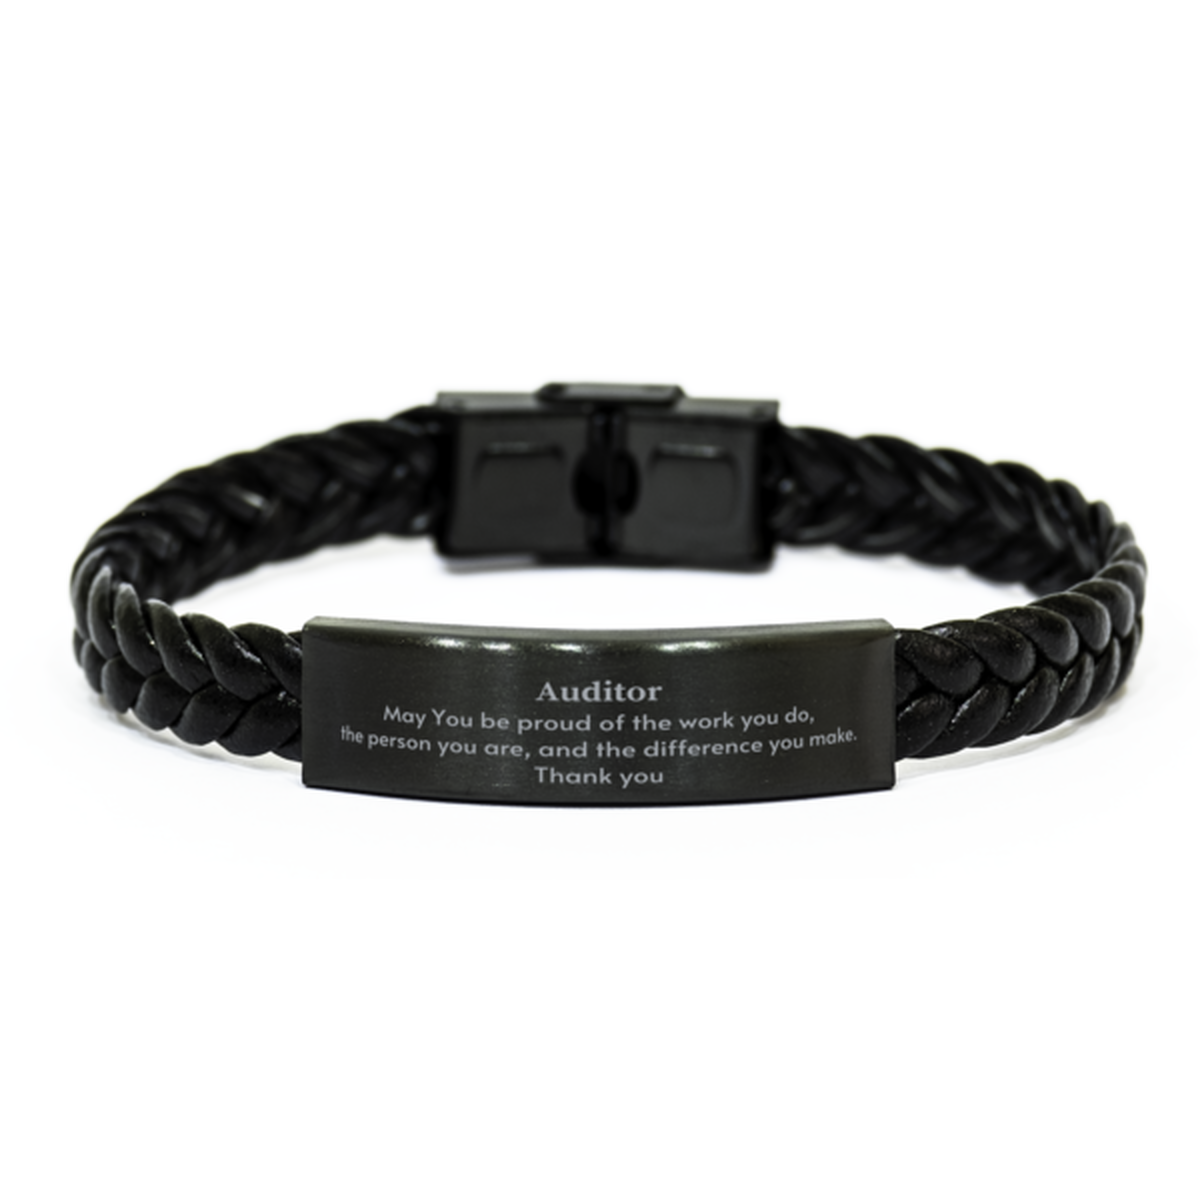 Heartwarming Braided Leather Bracelet Retirement Coworkers Gifts for Auditor, Auditor May You be proud of the work you do, the person you are Gifts for Boss Men Women Friends